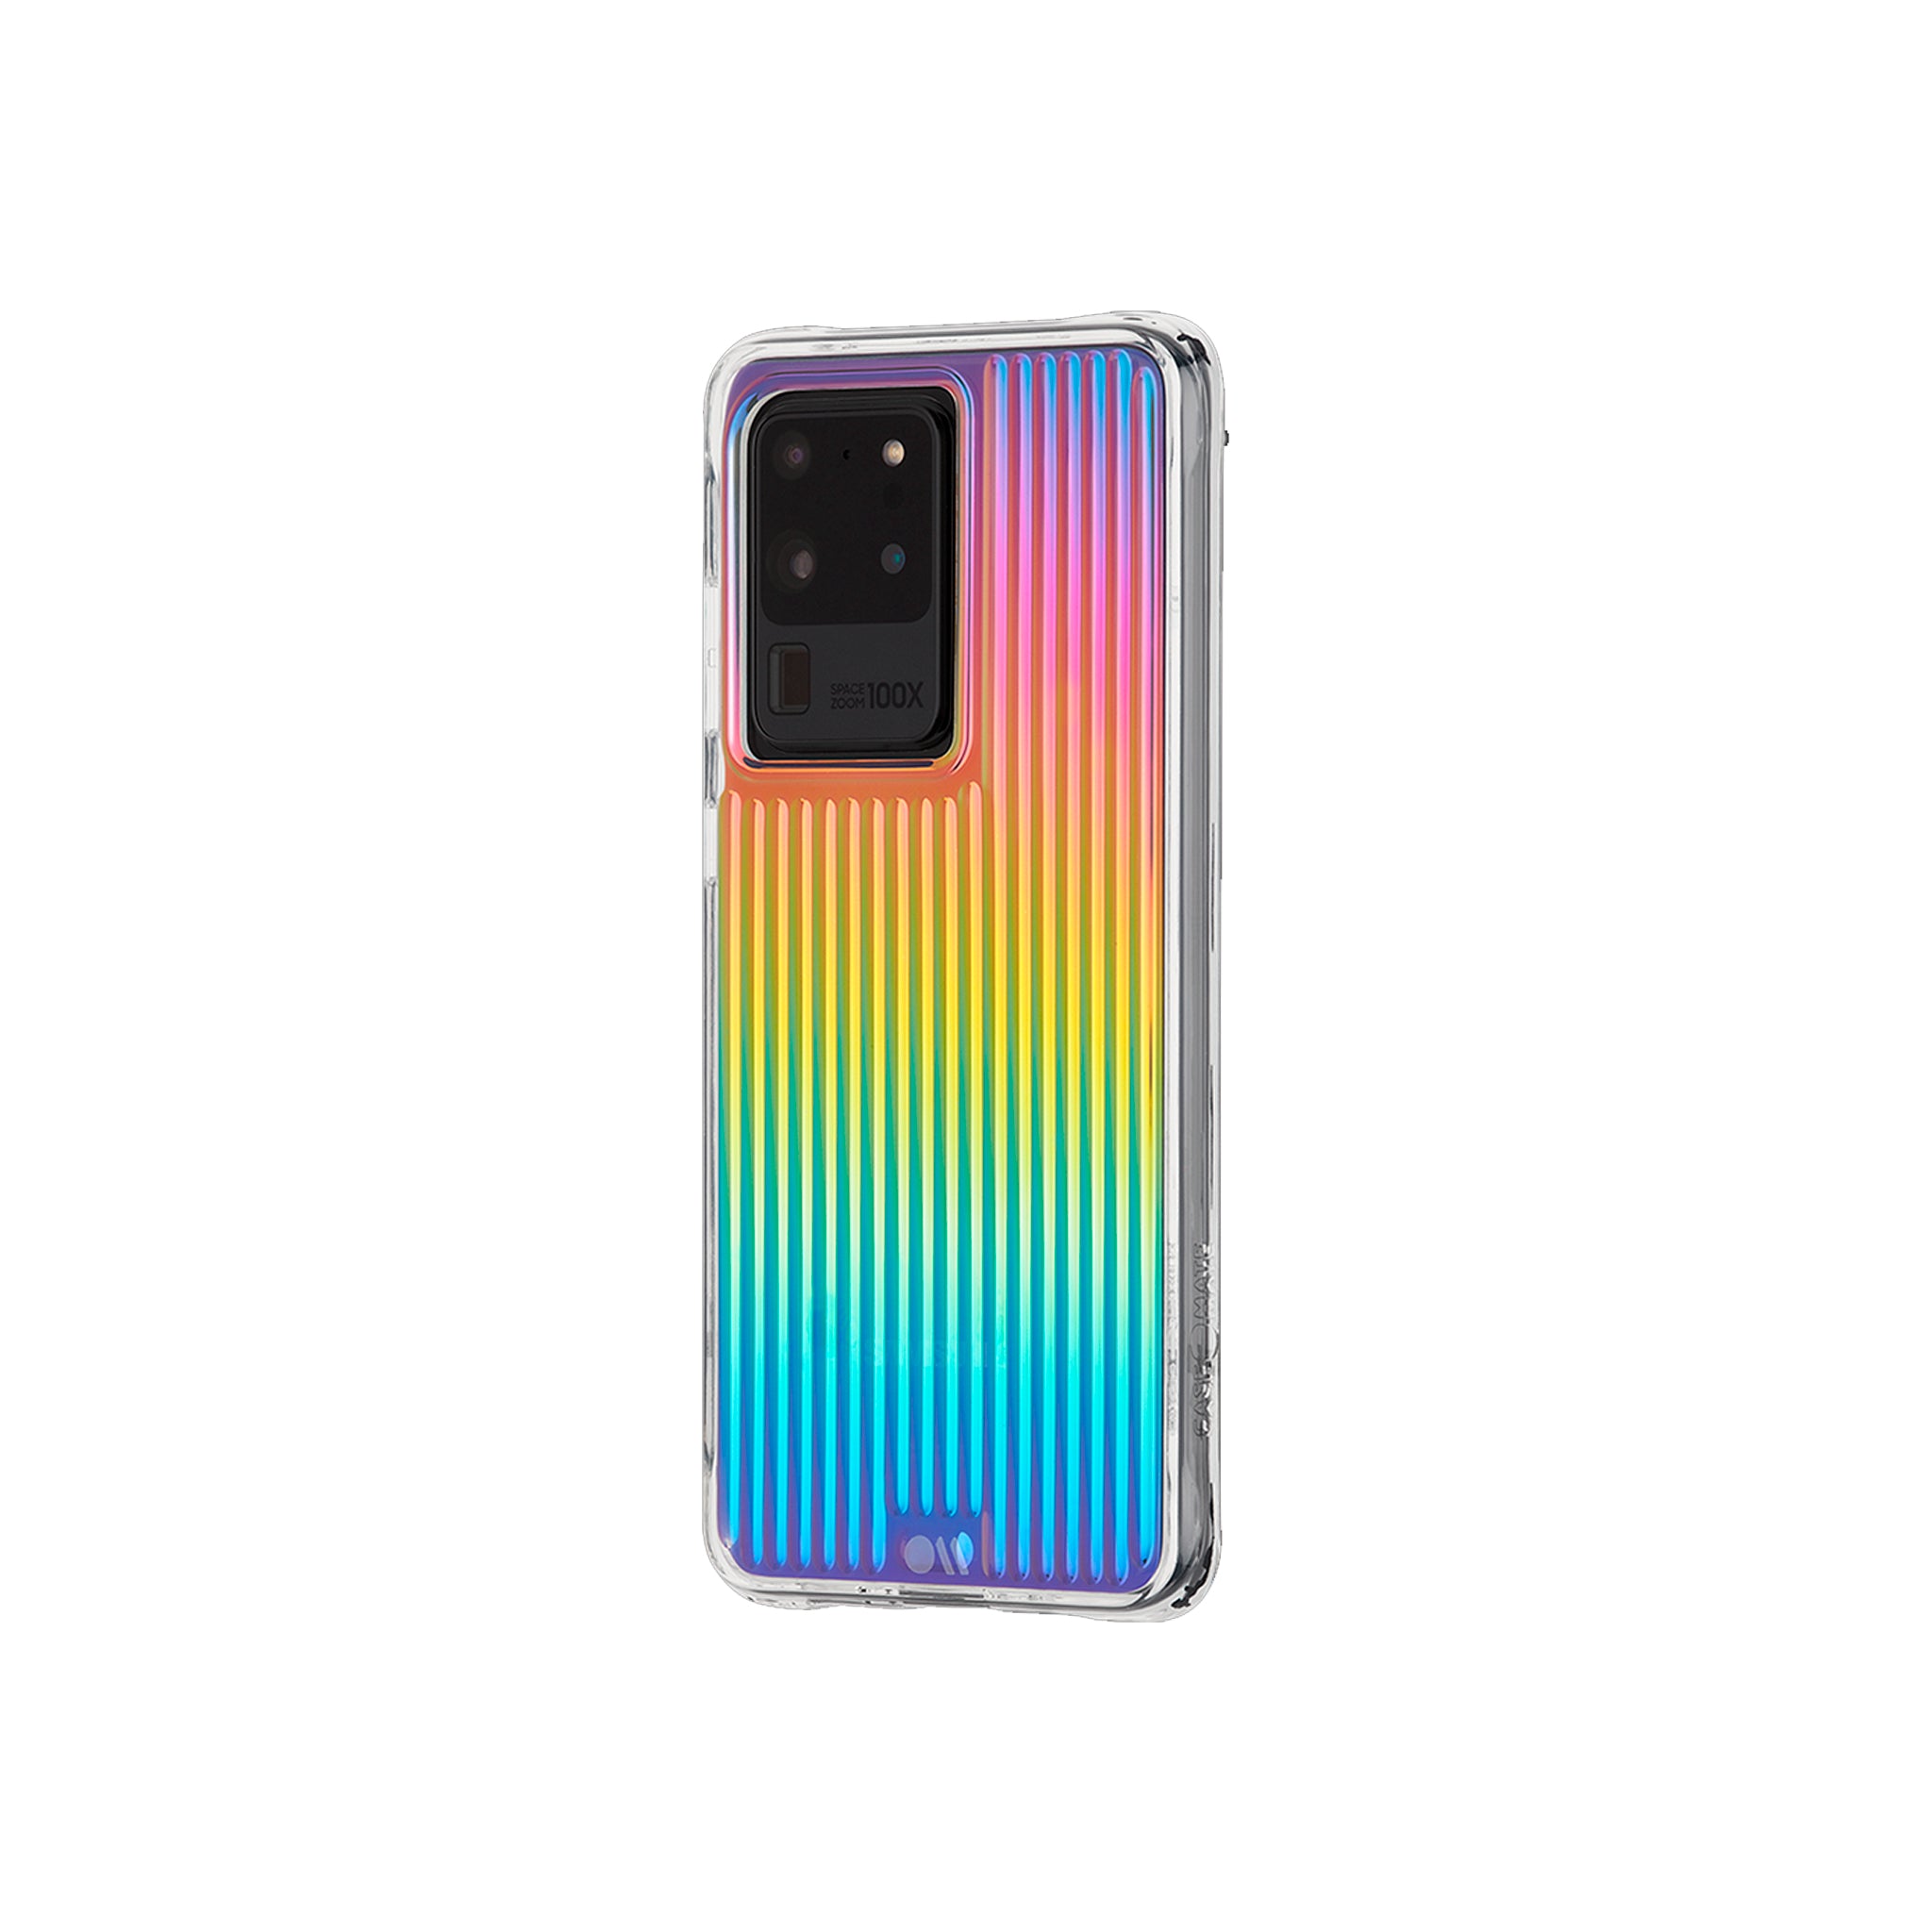 Case-mate - Tough Groove Case For Samsung Galaxy S20 Ultra - Iridescent